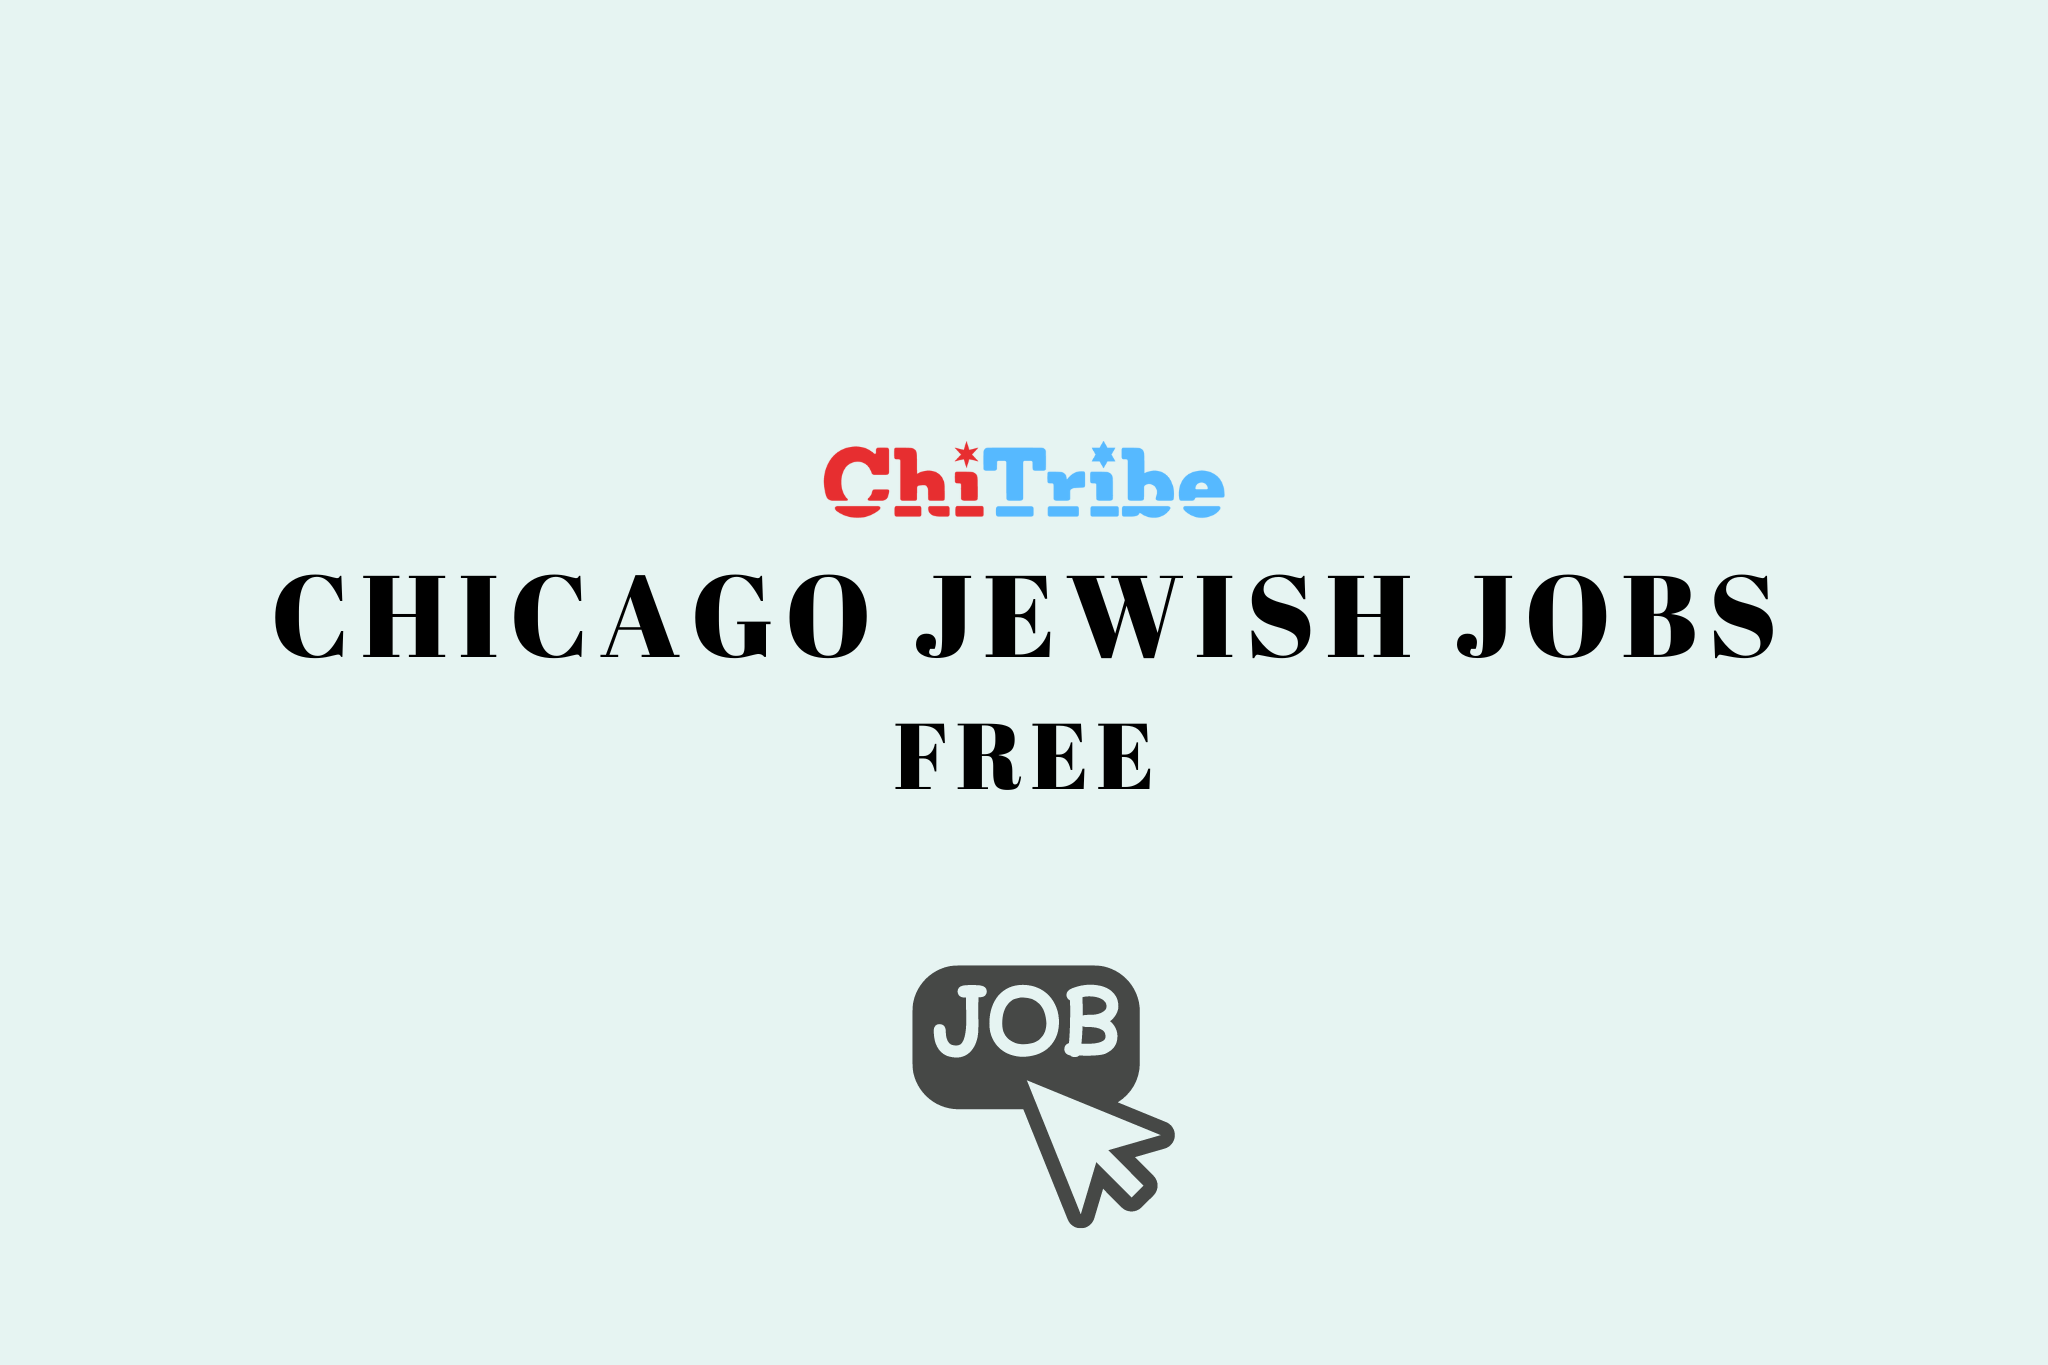 Post Your Job Openings for Free on the ChiTribe Jewish Chicago Job Board